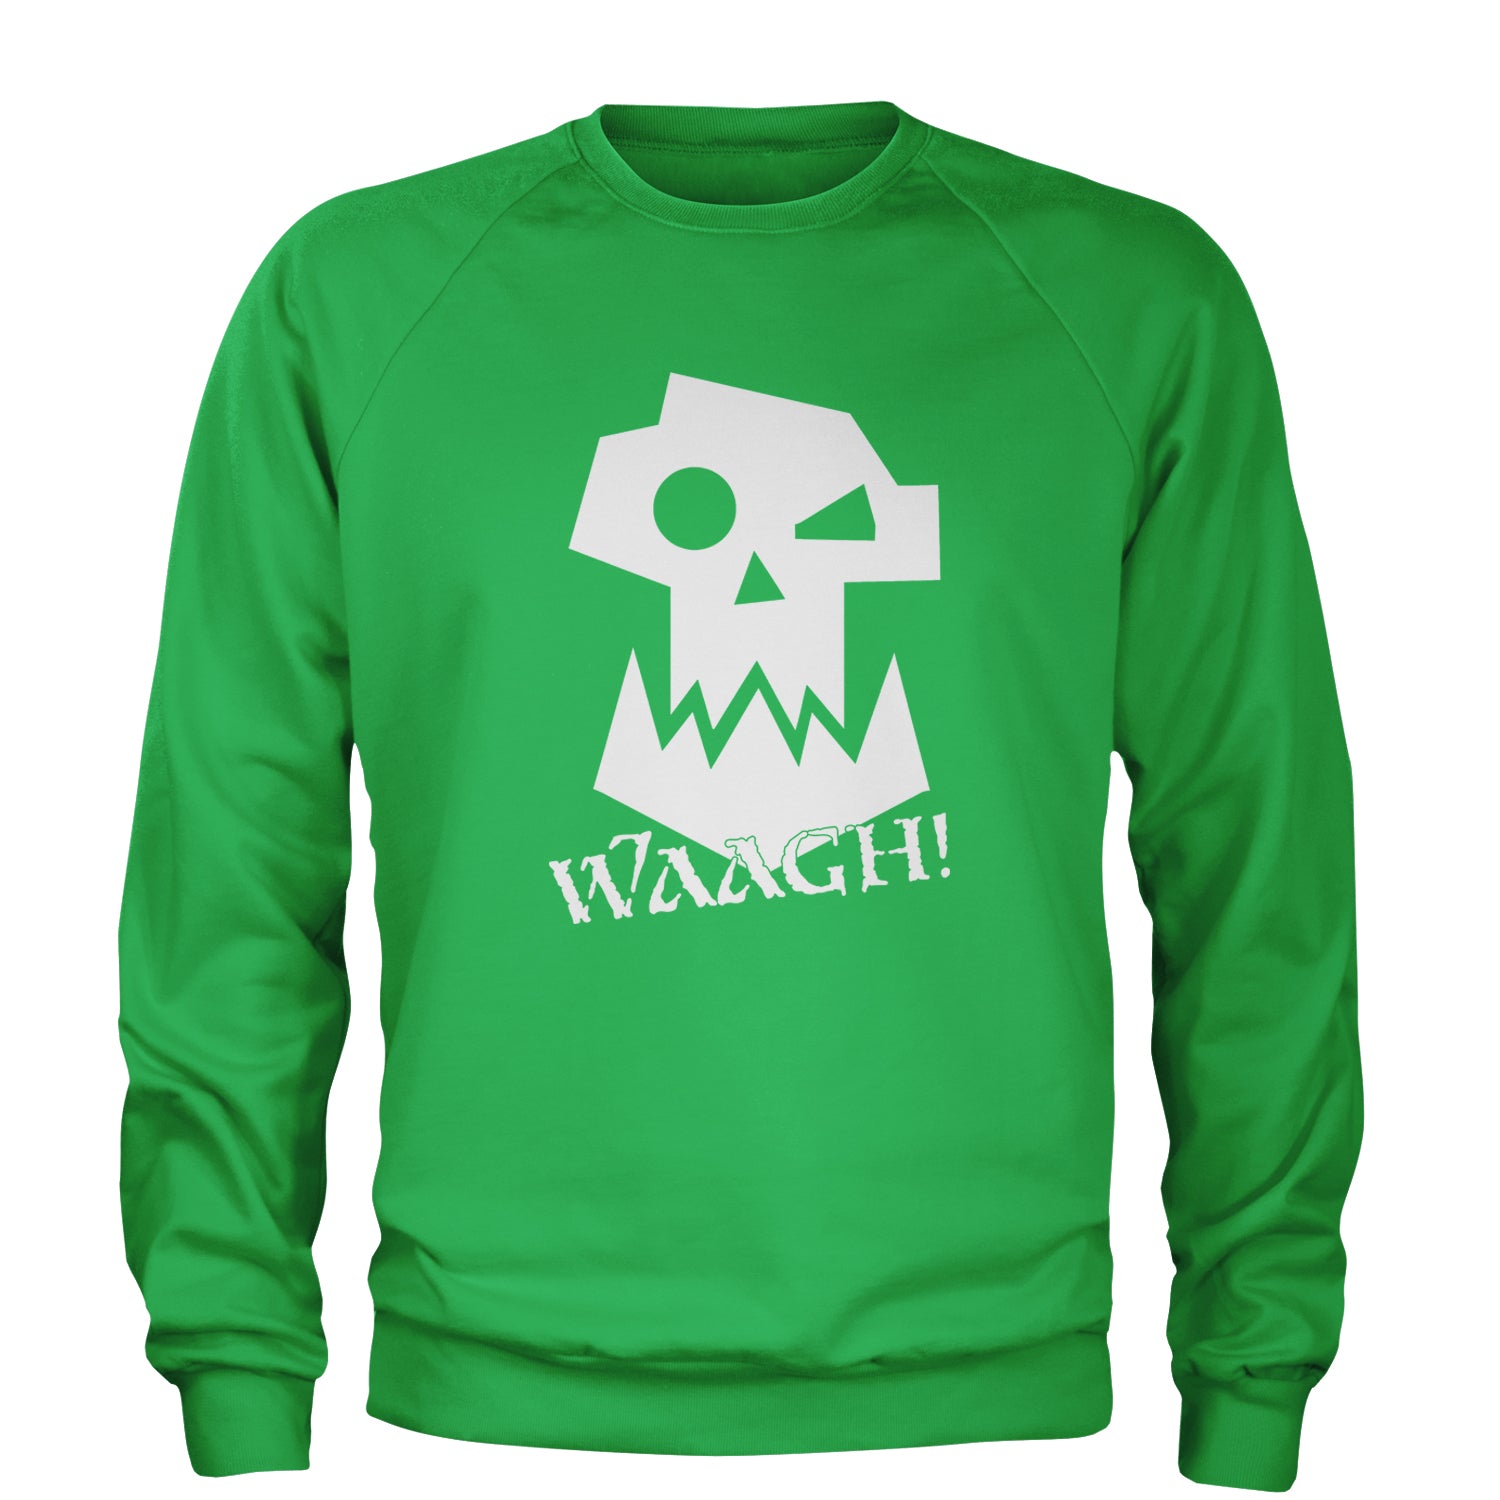 Ork Miniature Tabletop Wargaming Waagh Adult Crewneck Sweatshirt #expressiontees by Expression Tees